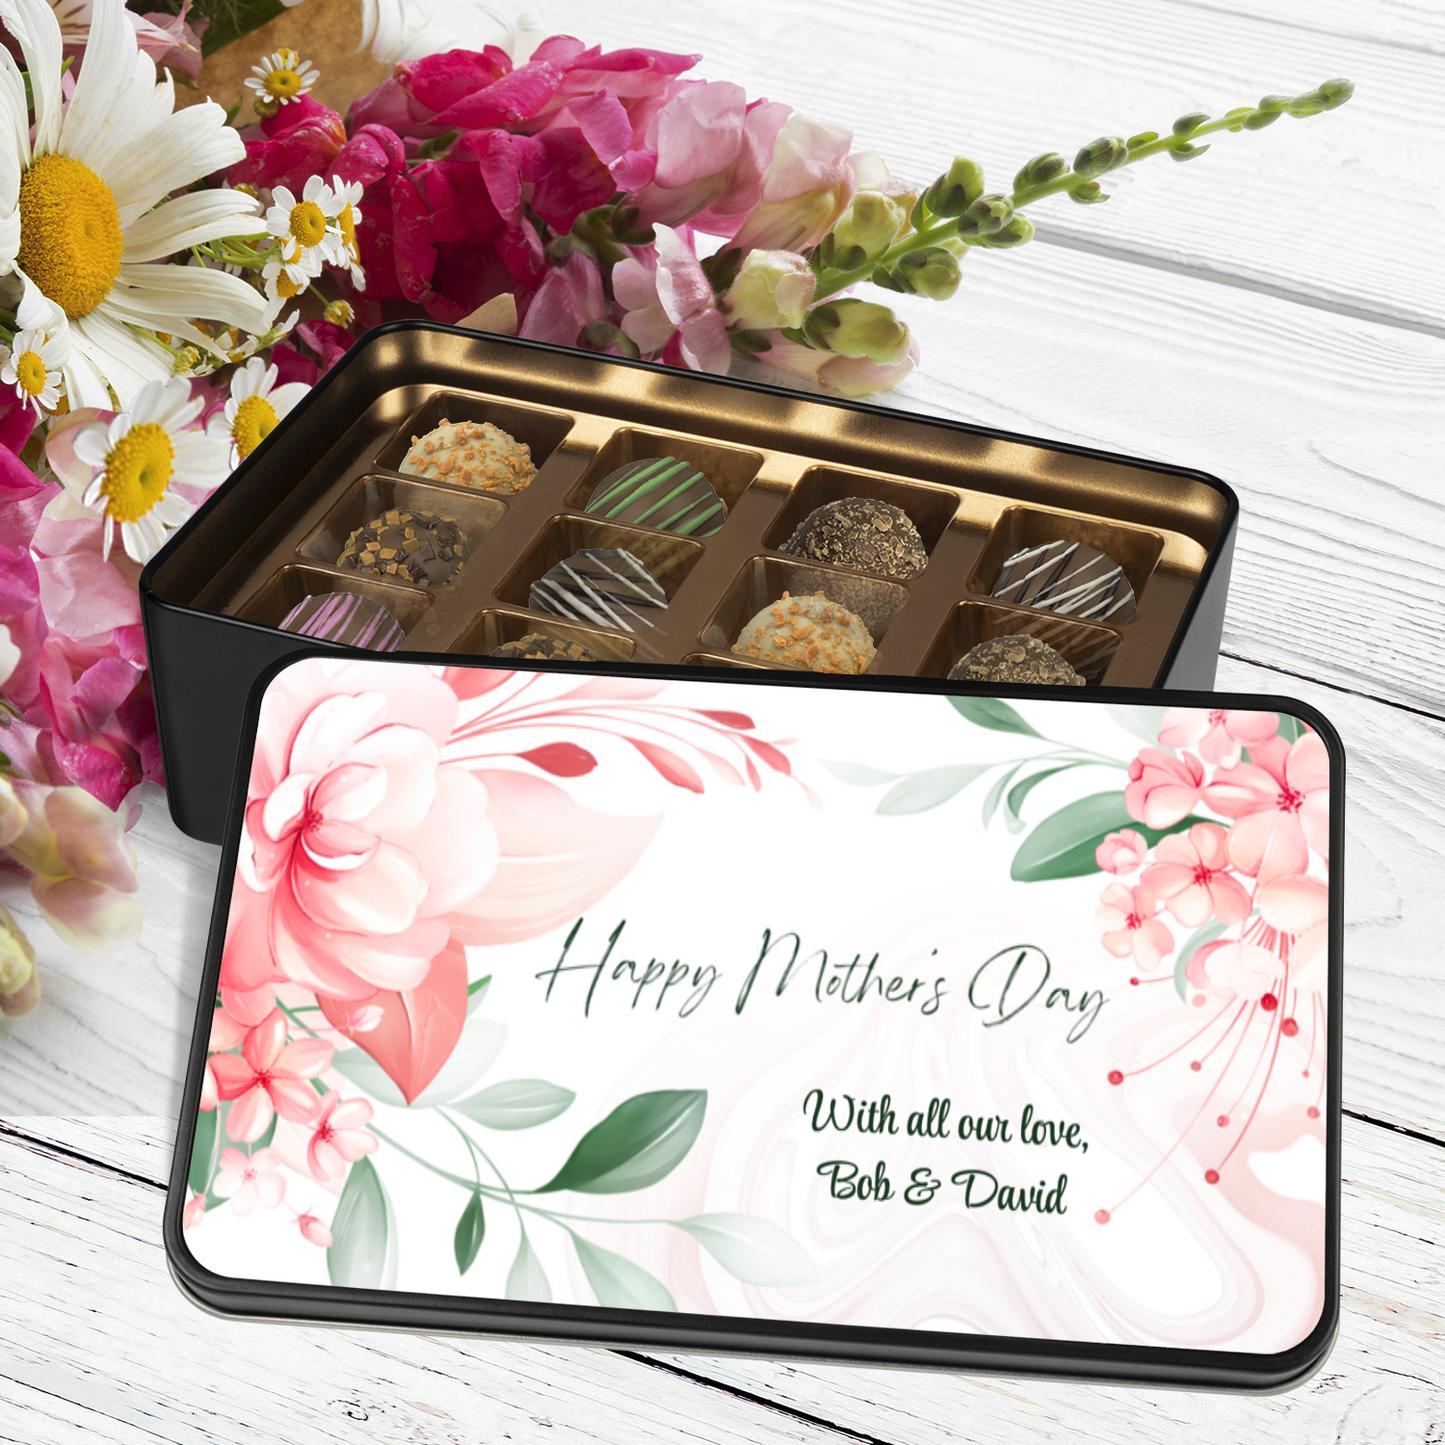 Personalized Chocolate Truffles Mother's Day Gift for Mom - Keepsake Tin